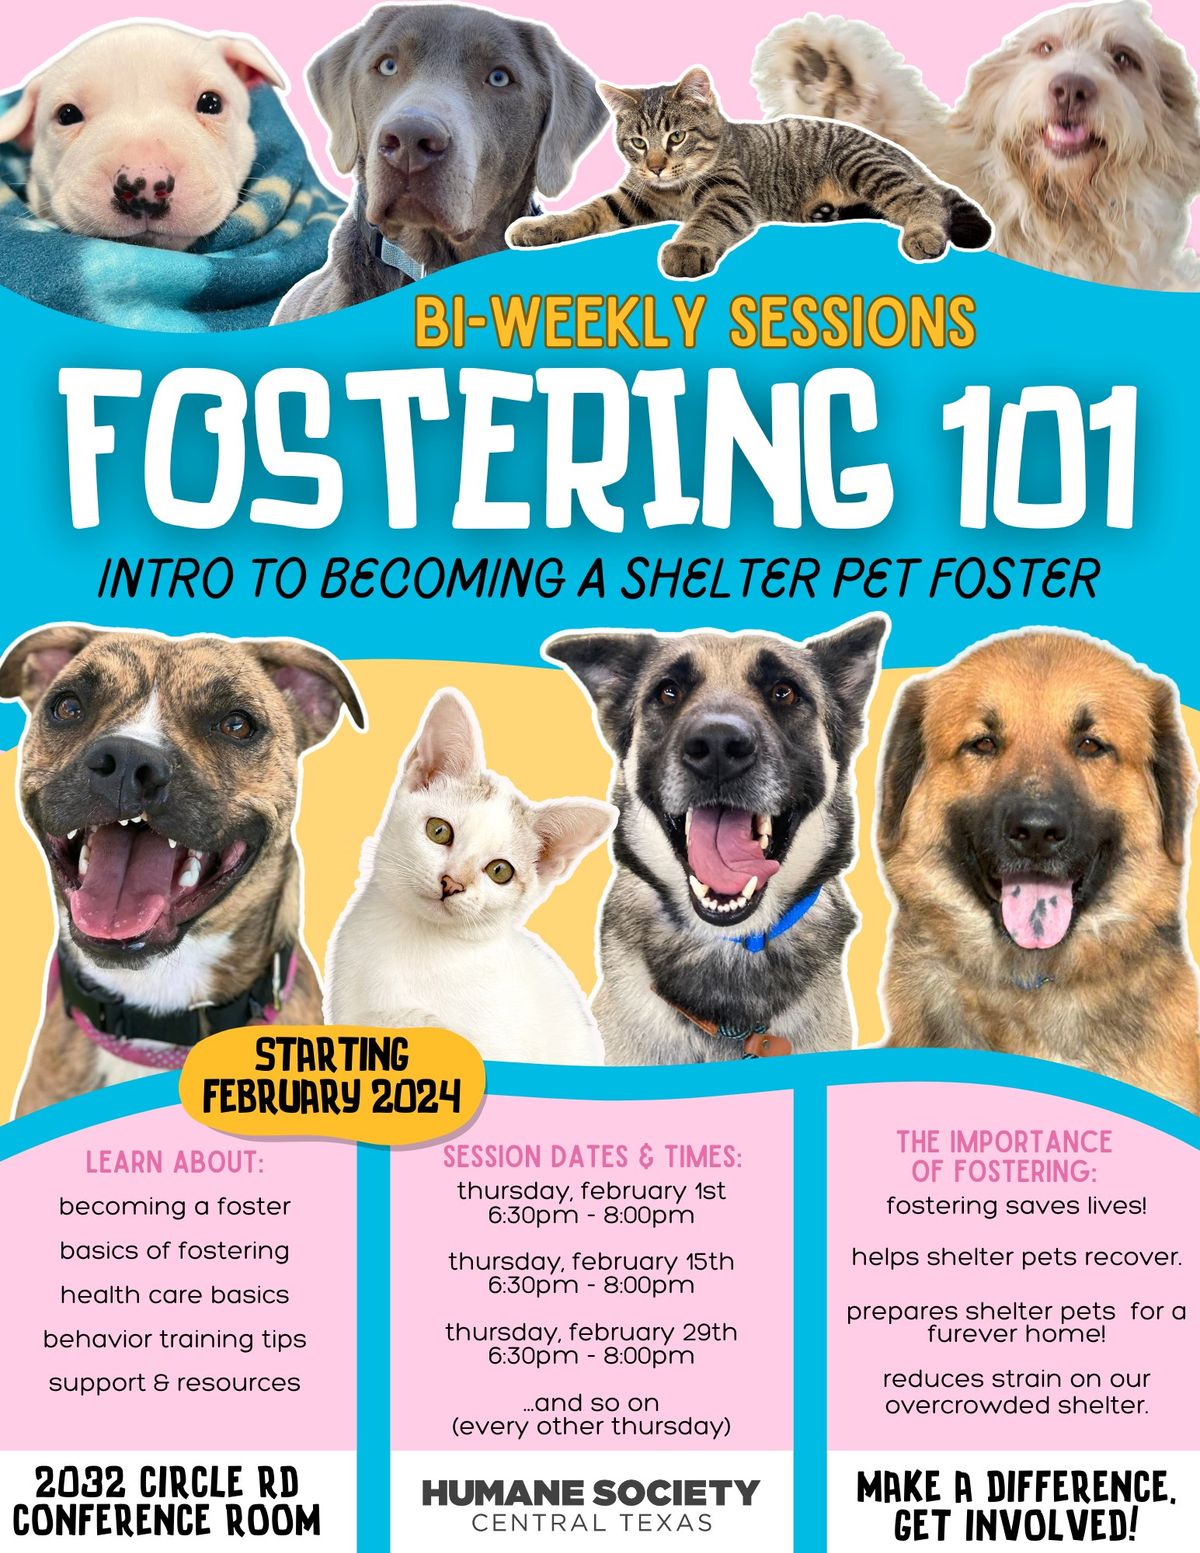 Fostering 101: Intro to Becoming a Shelter Pet Foster